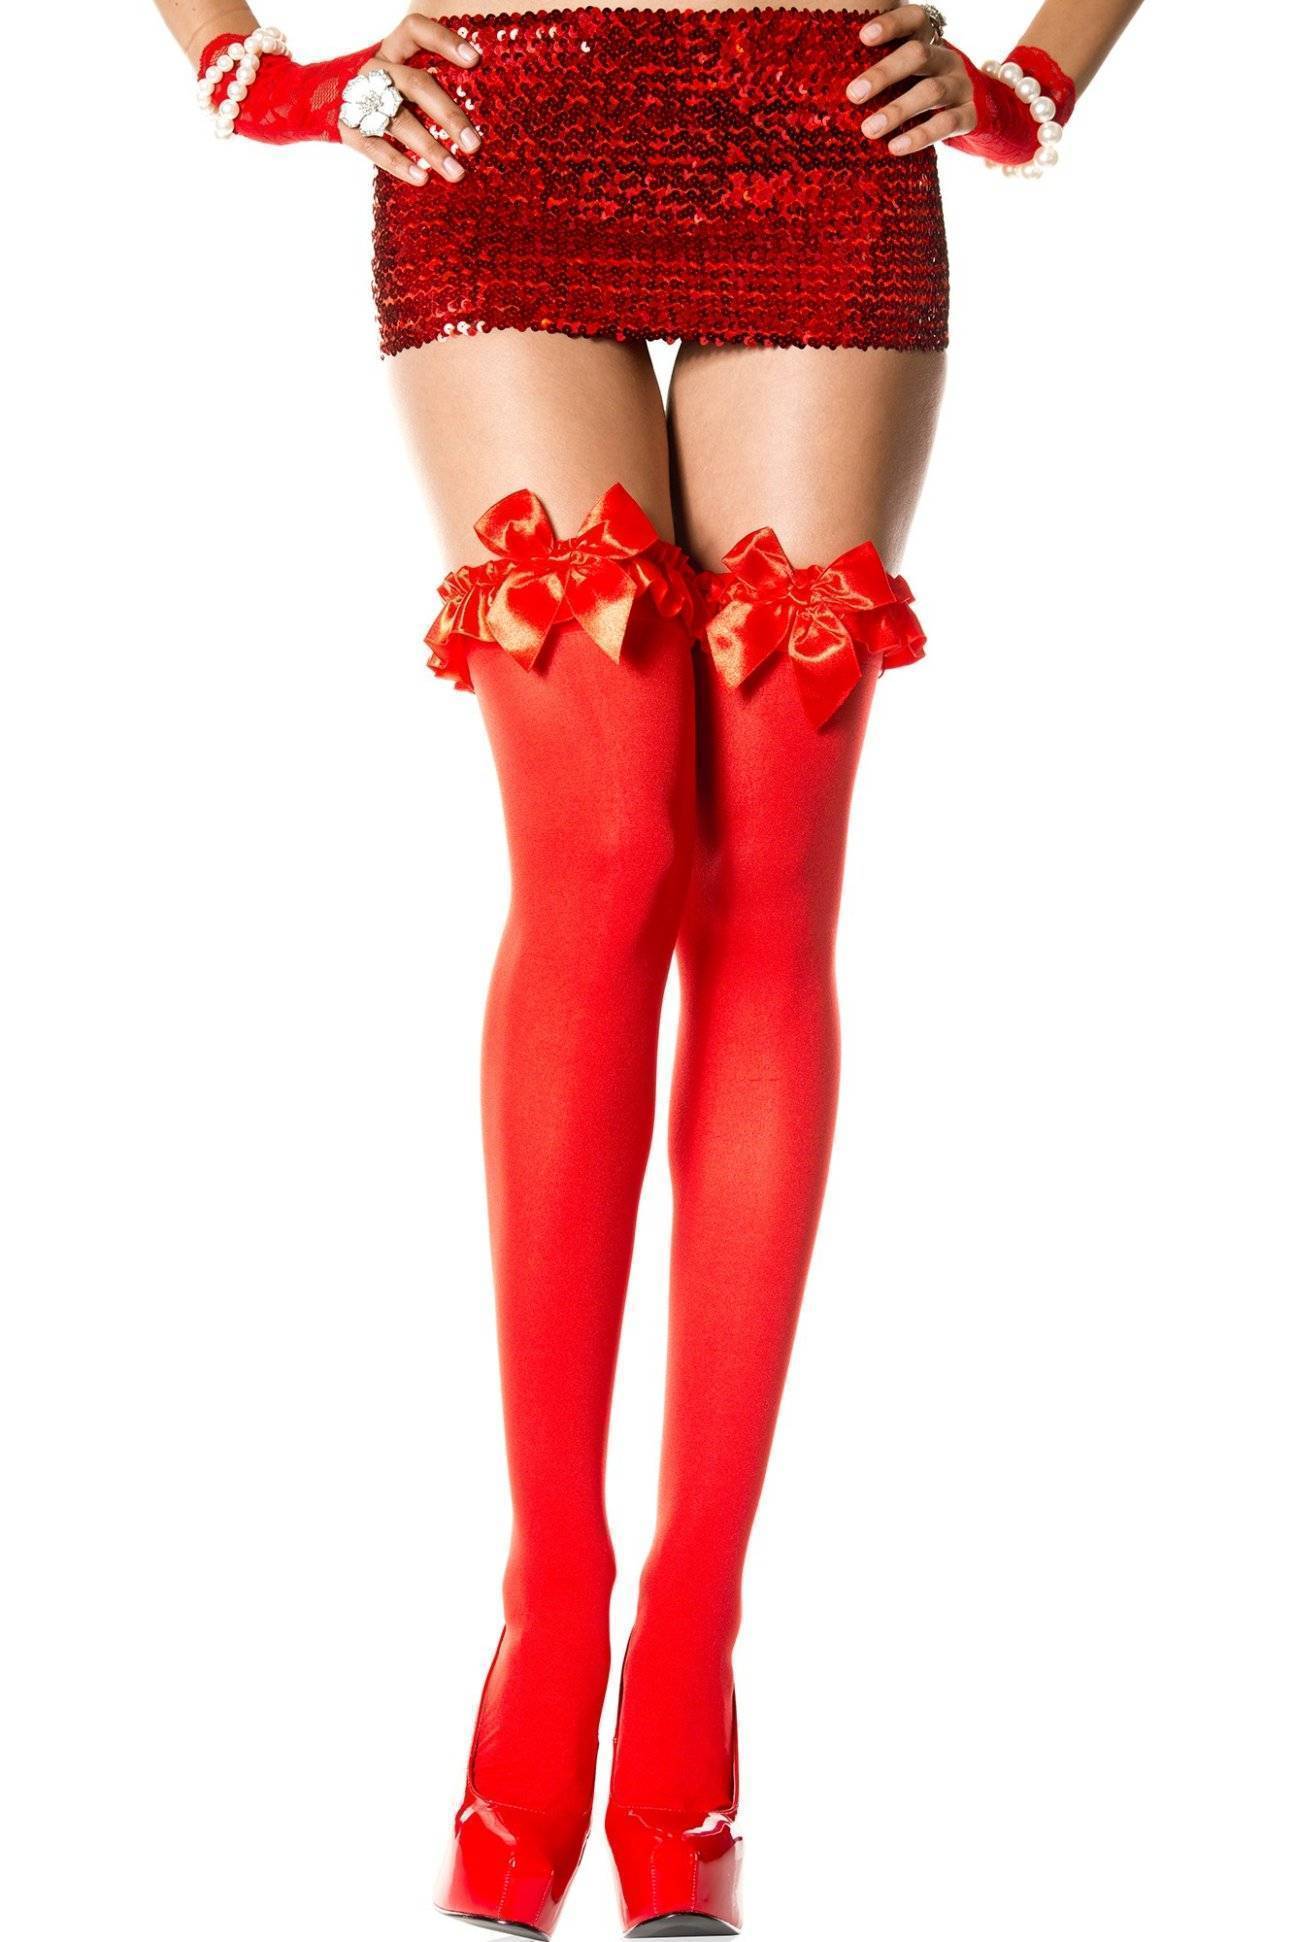 Opaque Hold-Ups with Satin Ruffle Trim + Bow - Red, White or Black